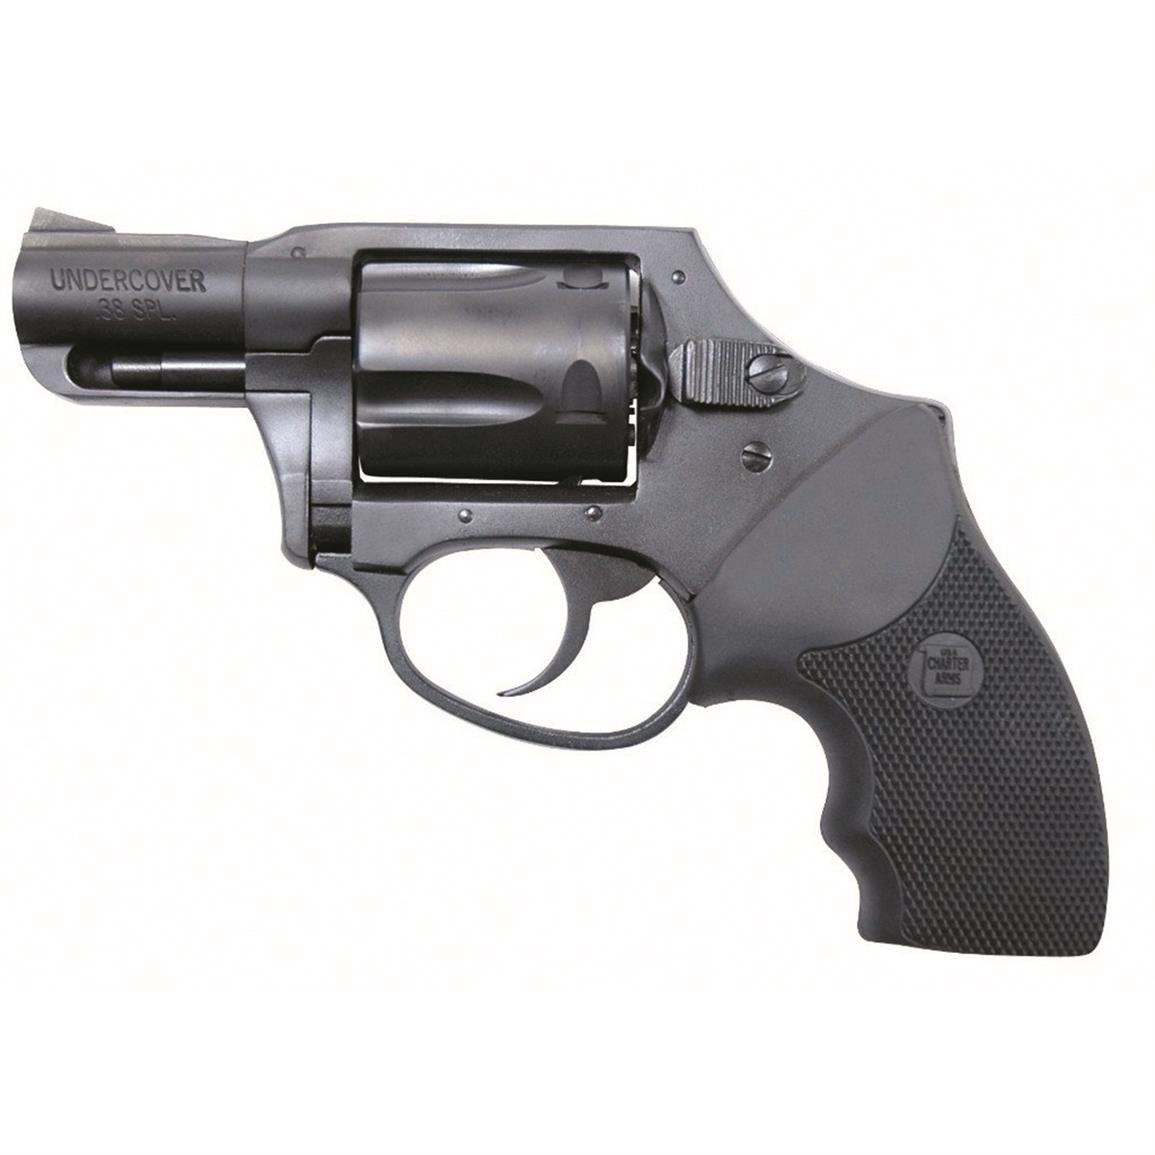 Charter Arms Undercover, Revolver, .38 Special, 2" Barrel, Hammerless / DAO, 5 Rounds